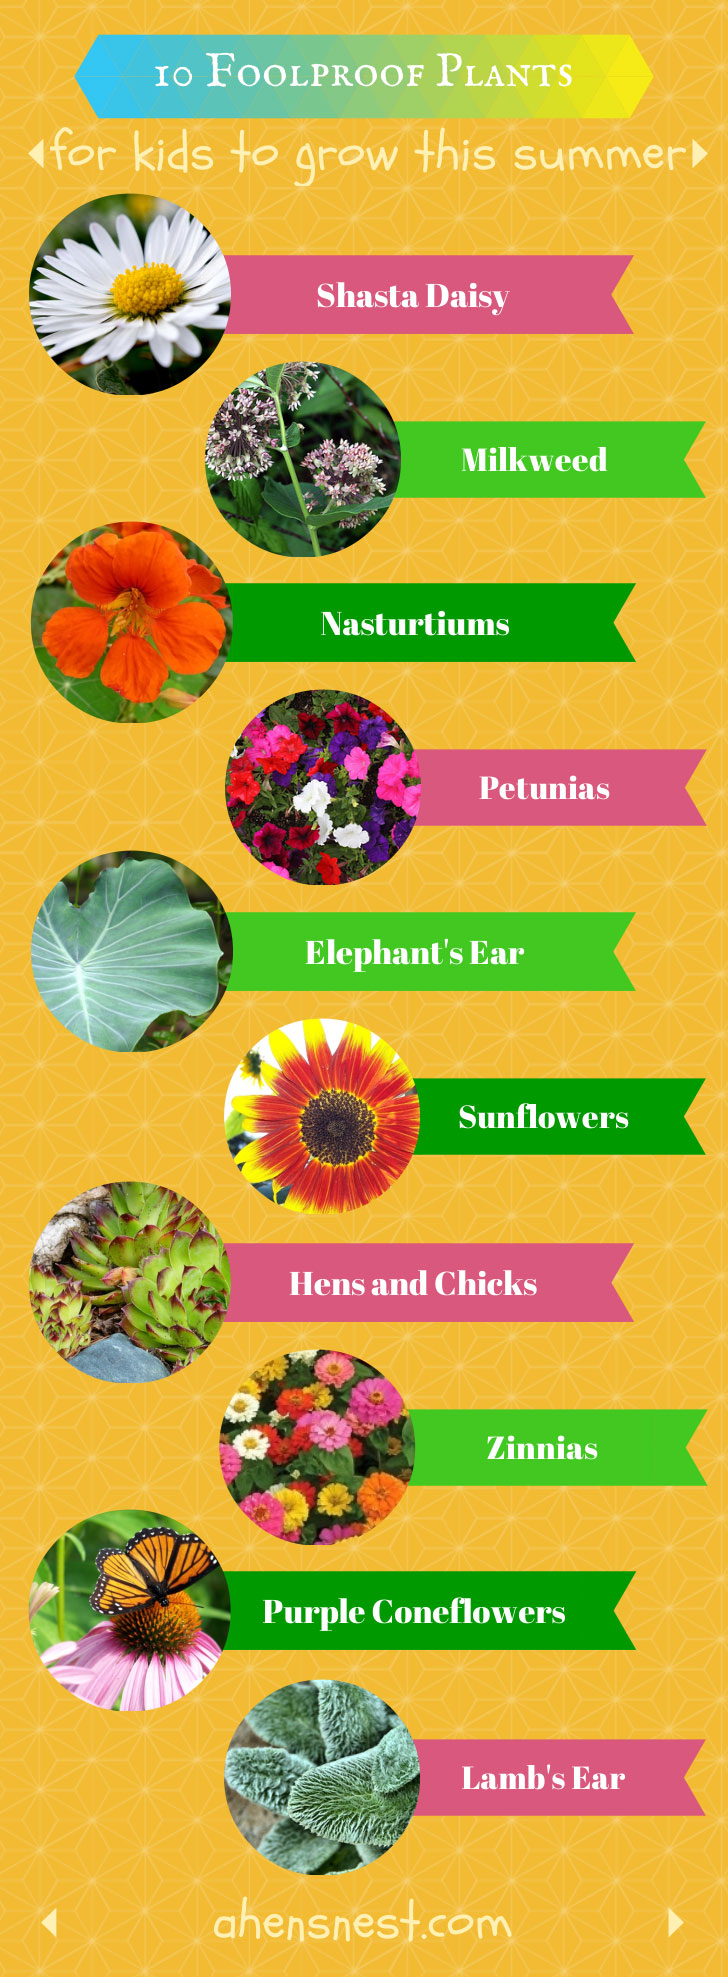 10 foolproof plants for kids to grow this summer